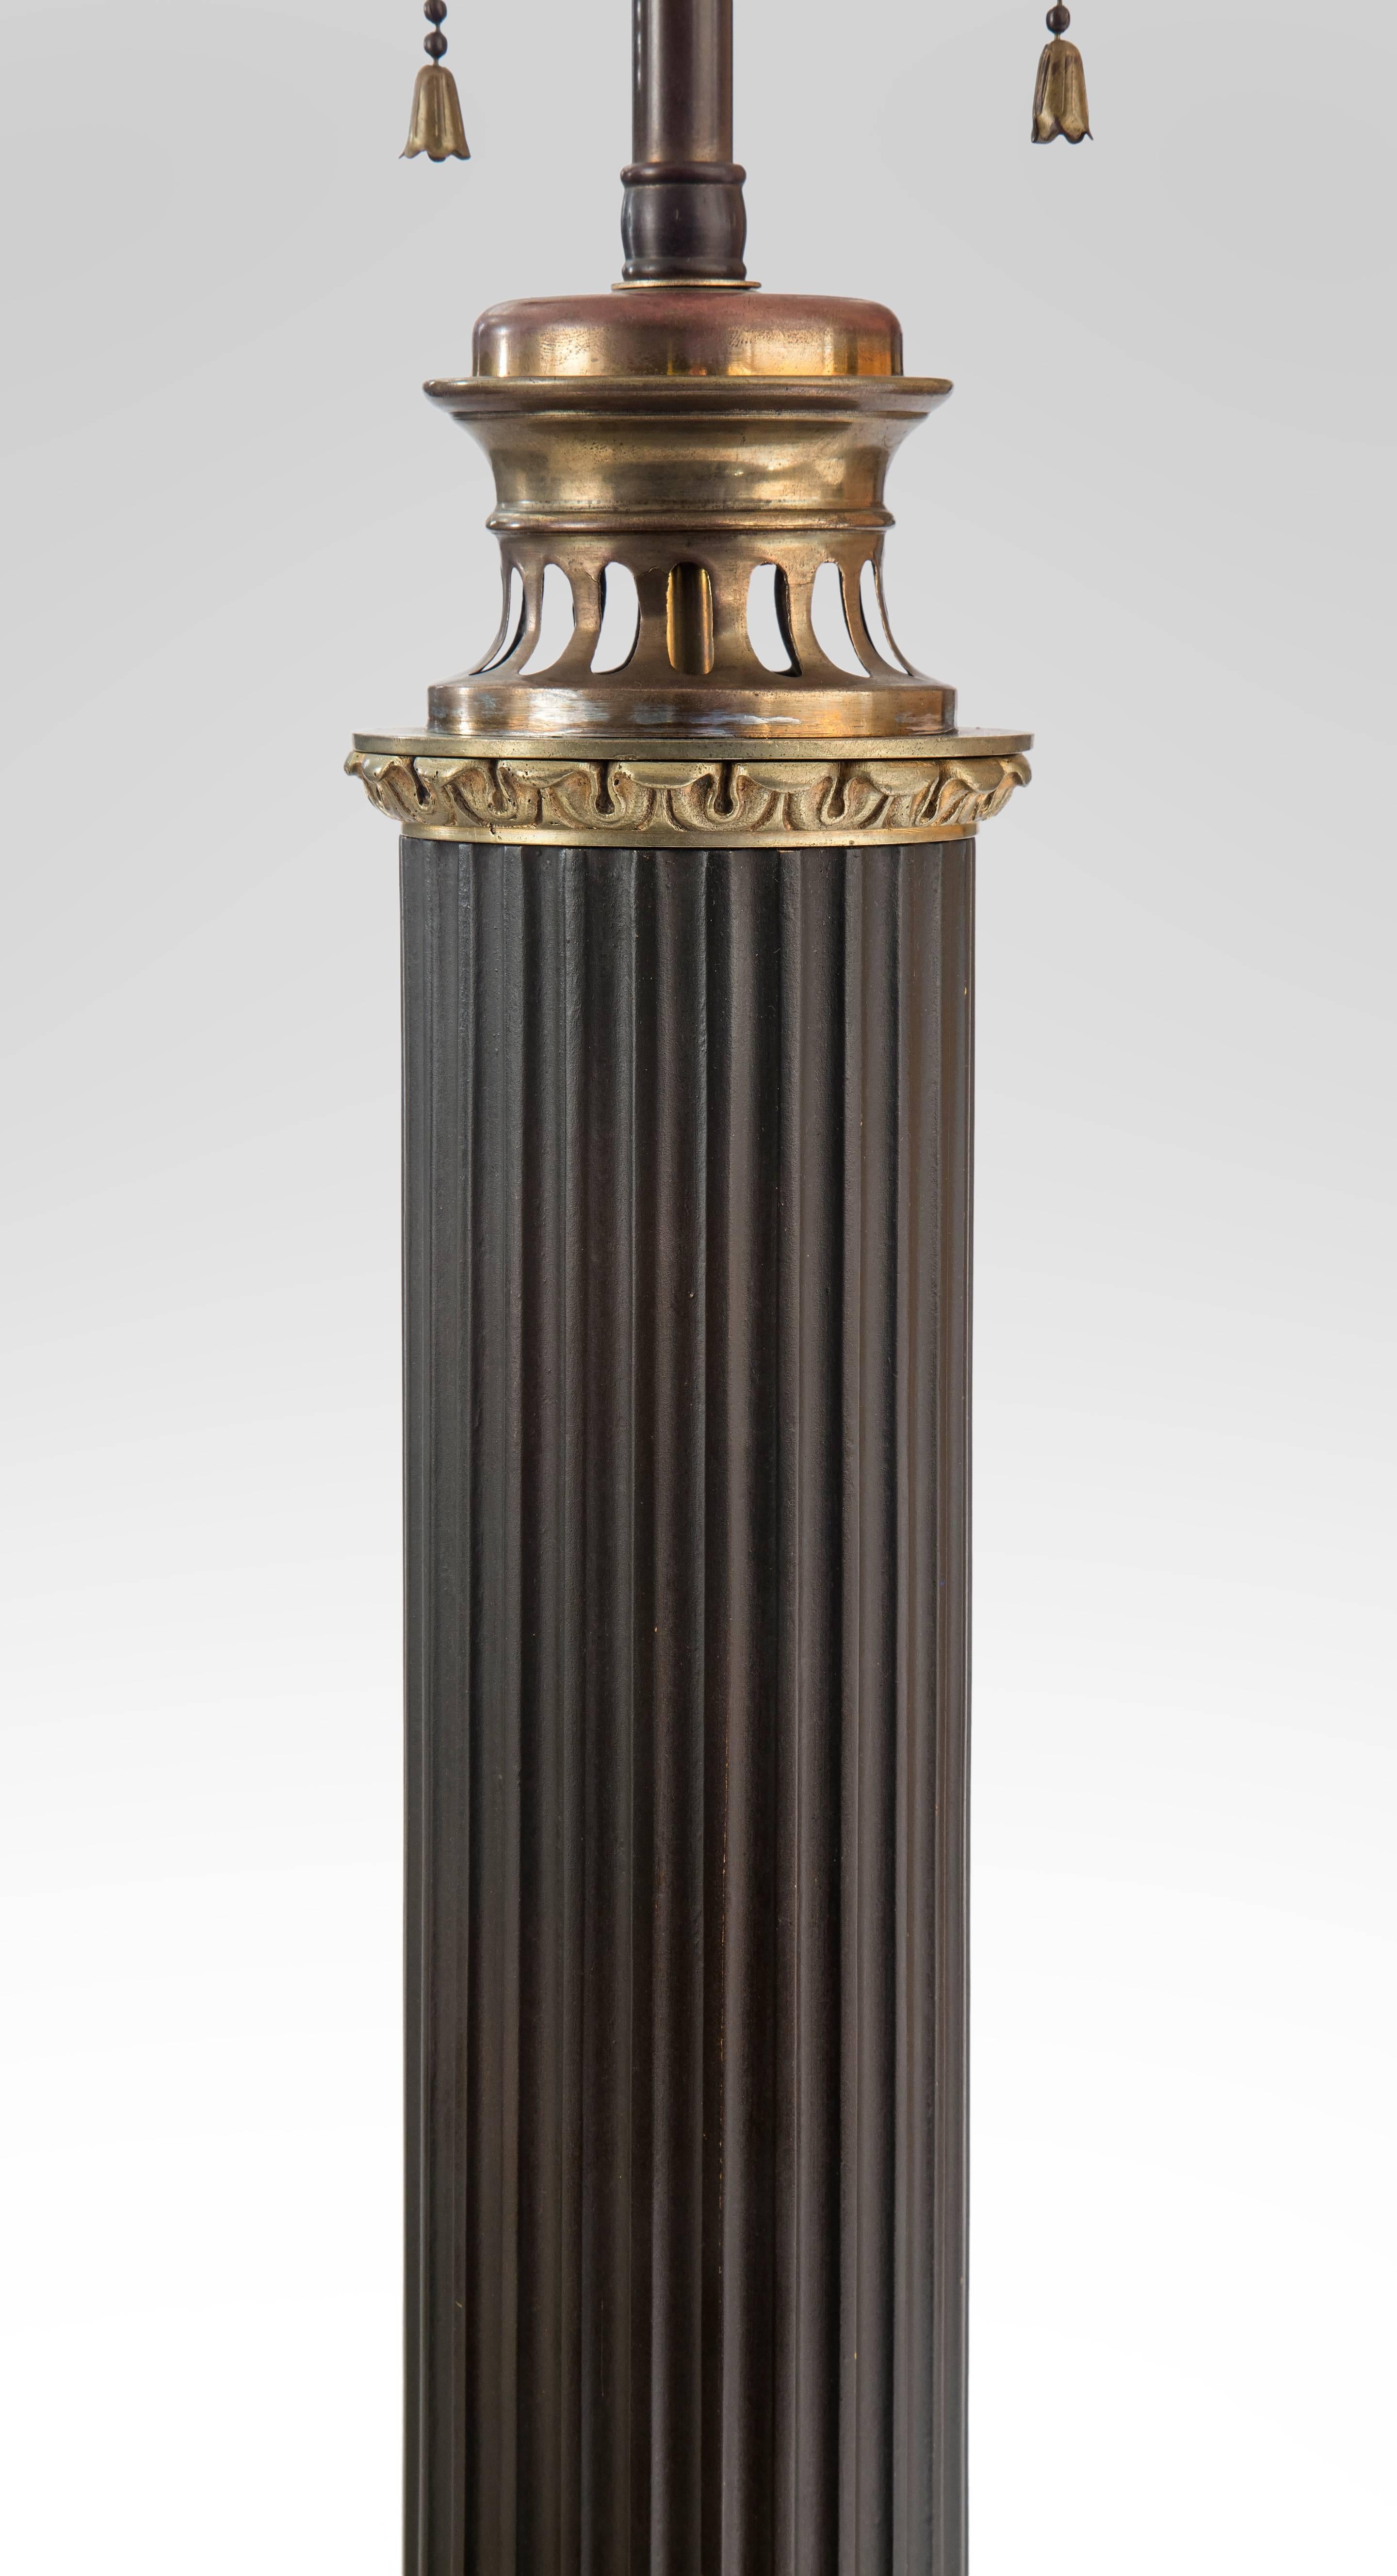 The circular fluted standard, above a gilt garland and rectangular box socle, terminating gilt acanthus molding on a square base.  Labeled: Lampe-Silvant.

Very good antique condition and ready to add to your collection.